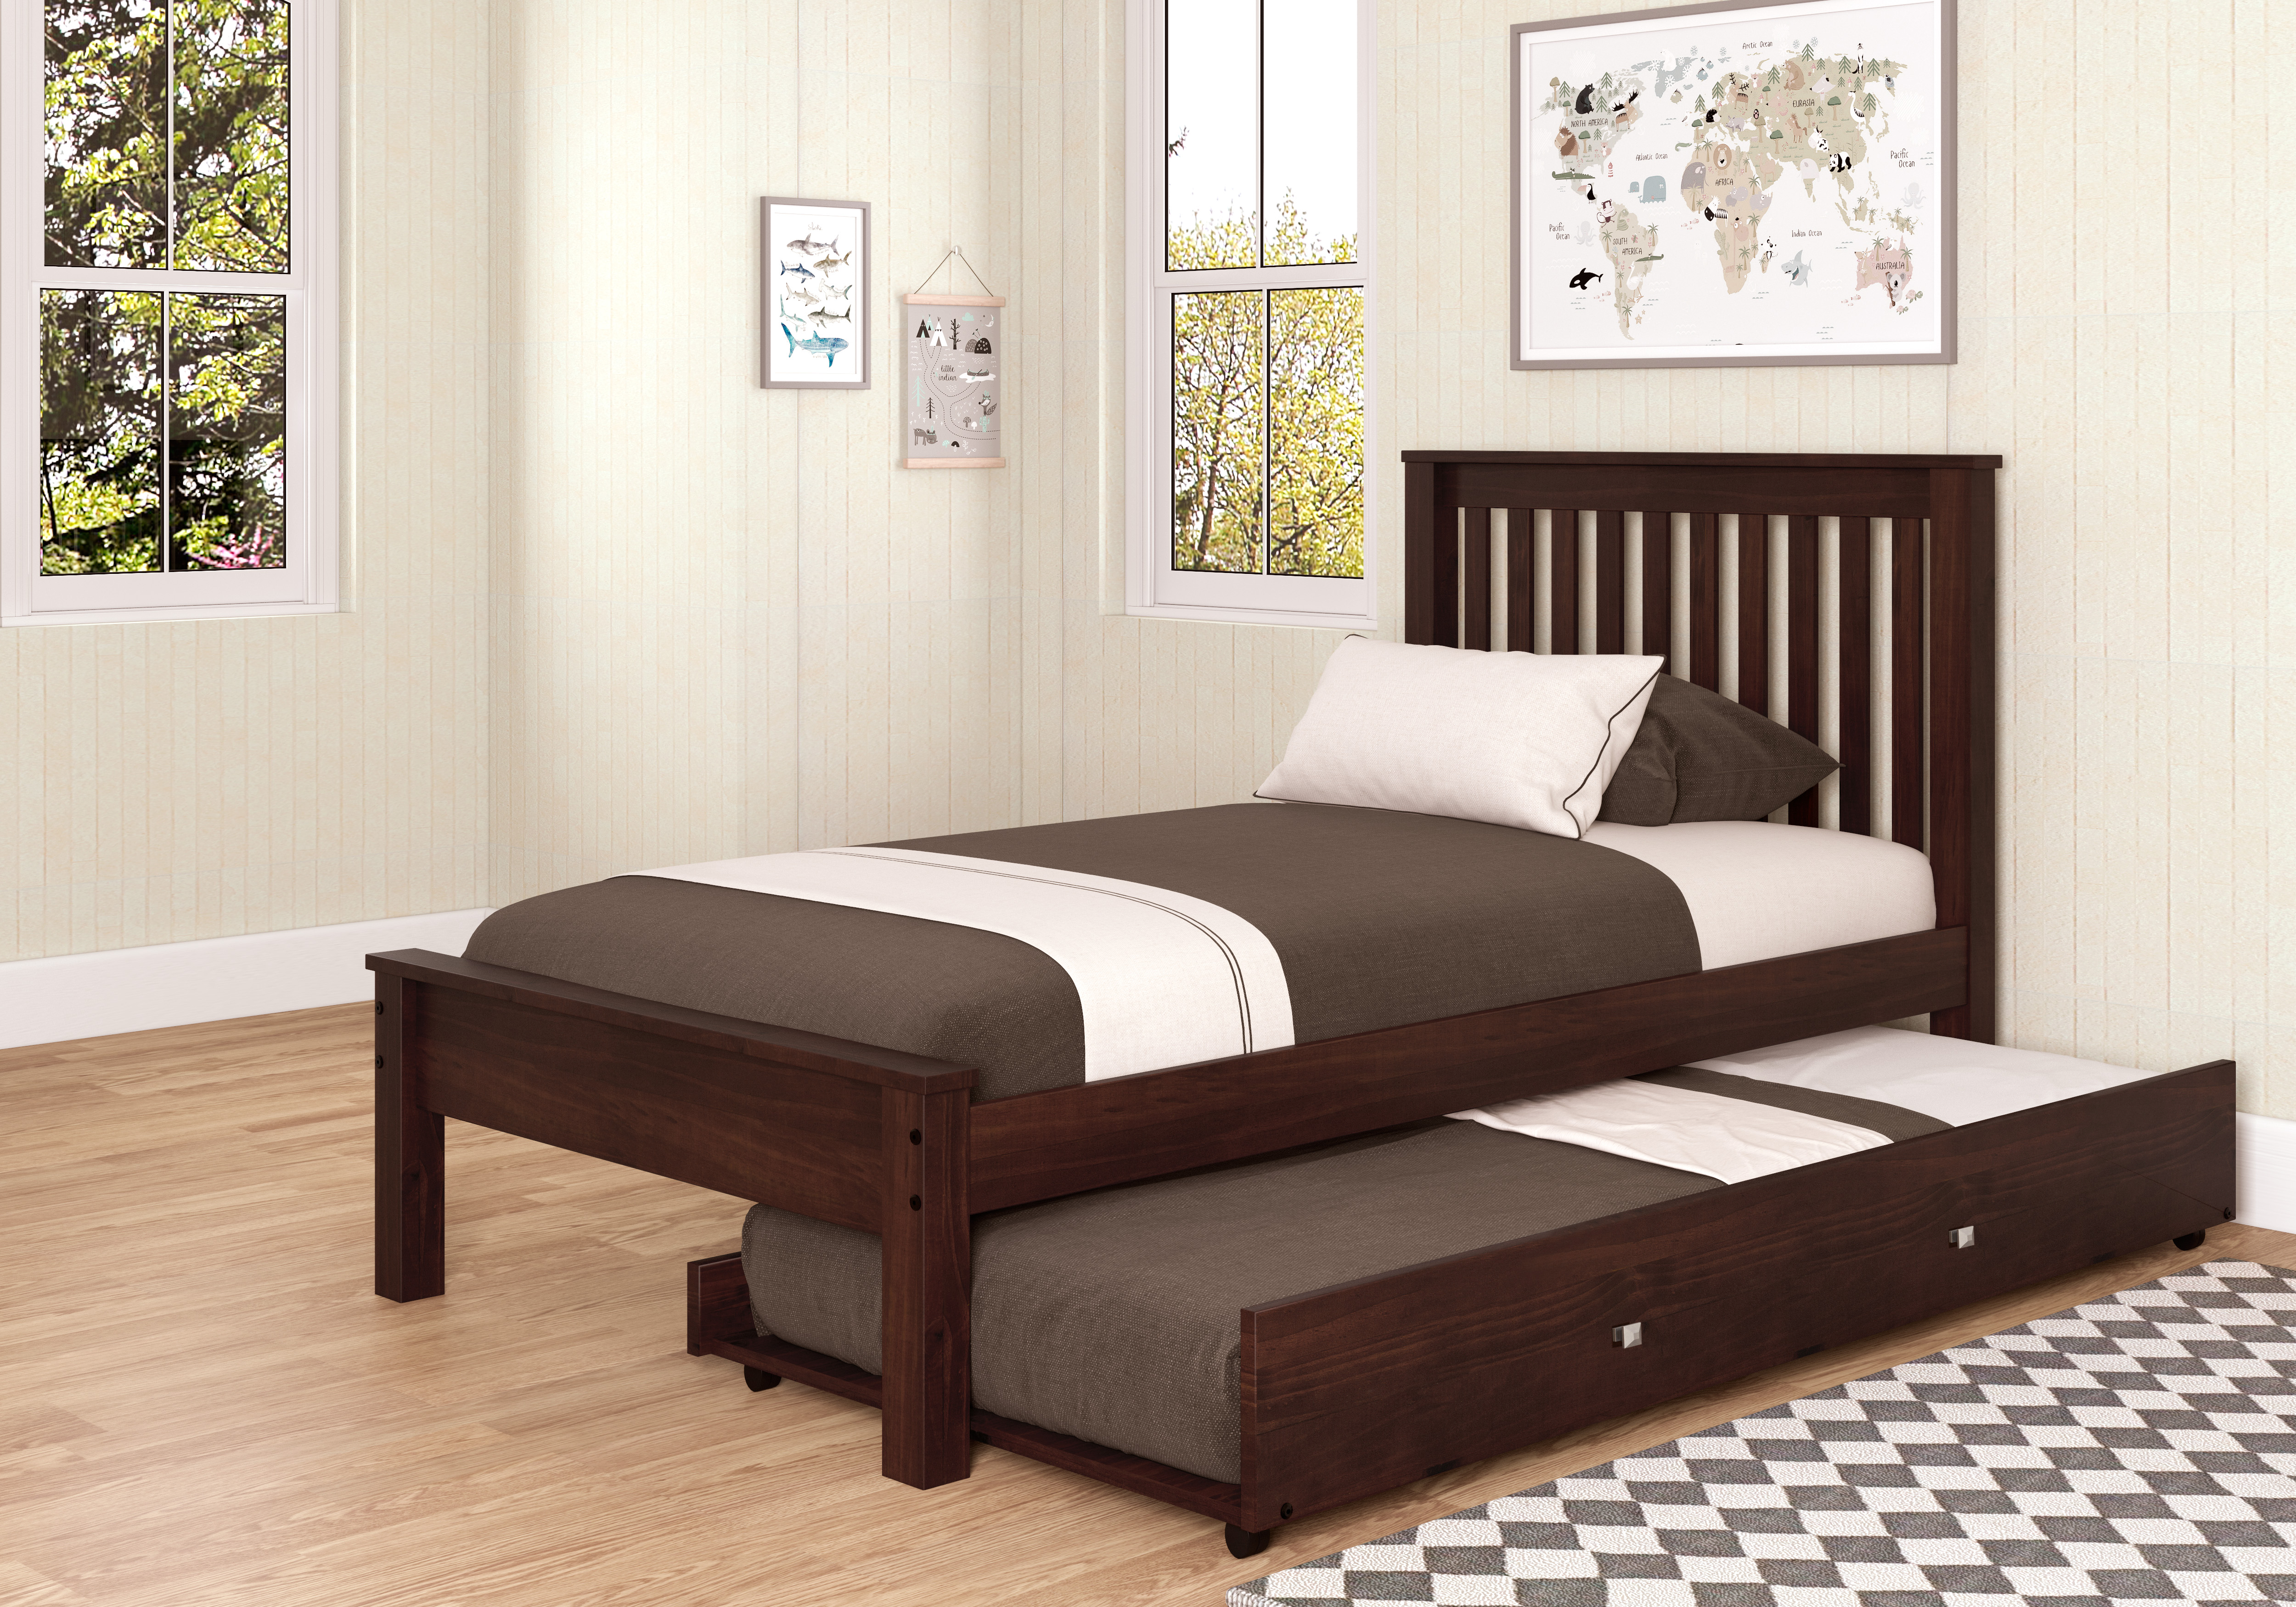 Donco Trading Company Contempo Twin Bed With Trundle